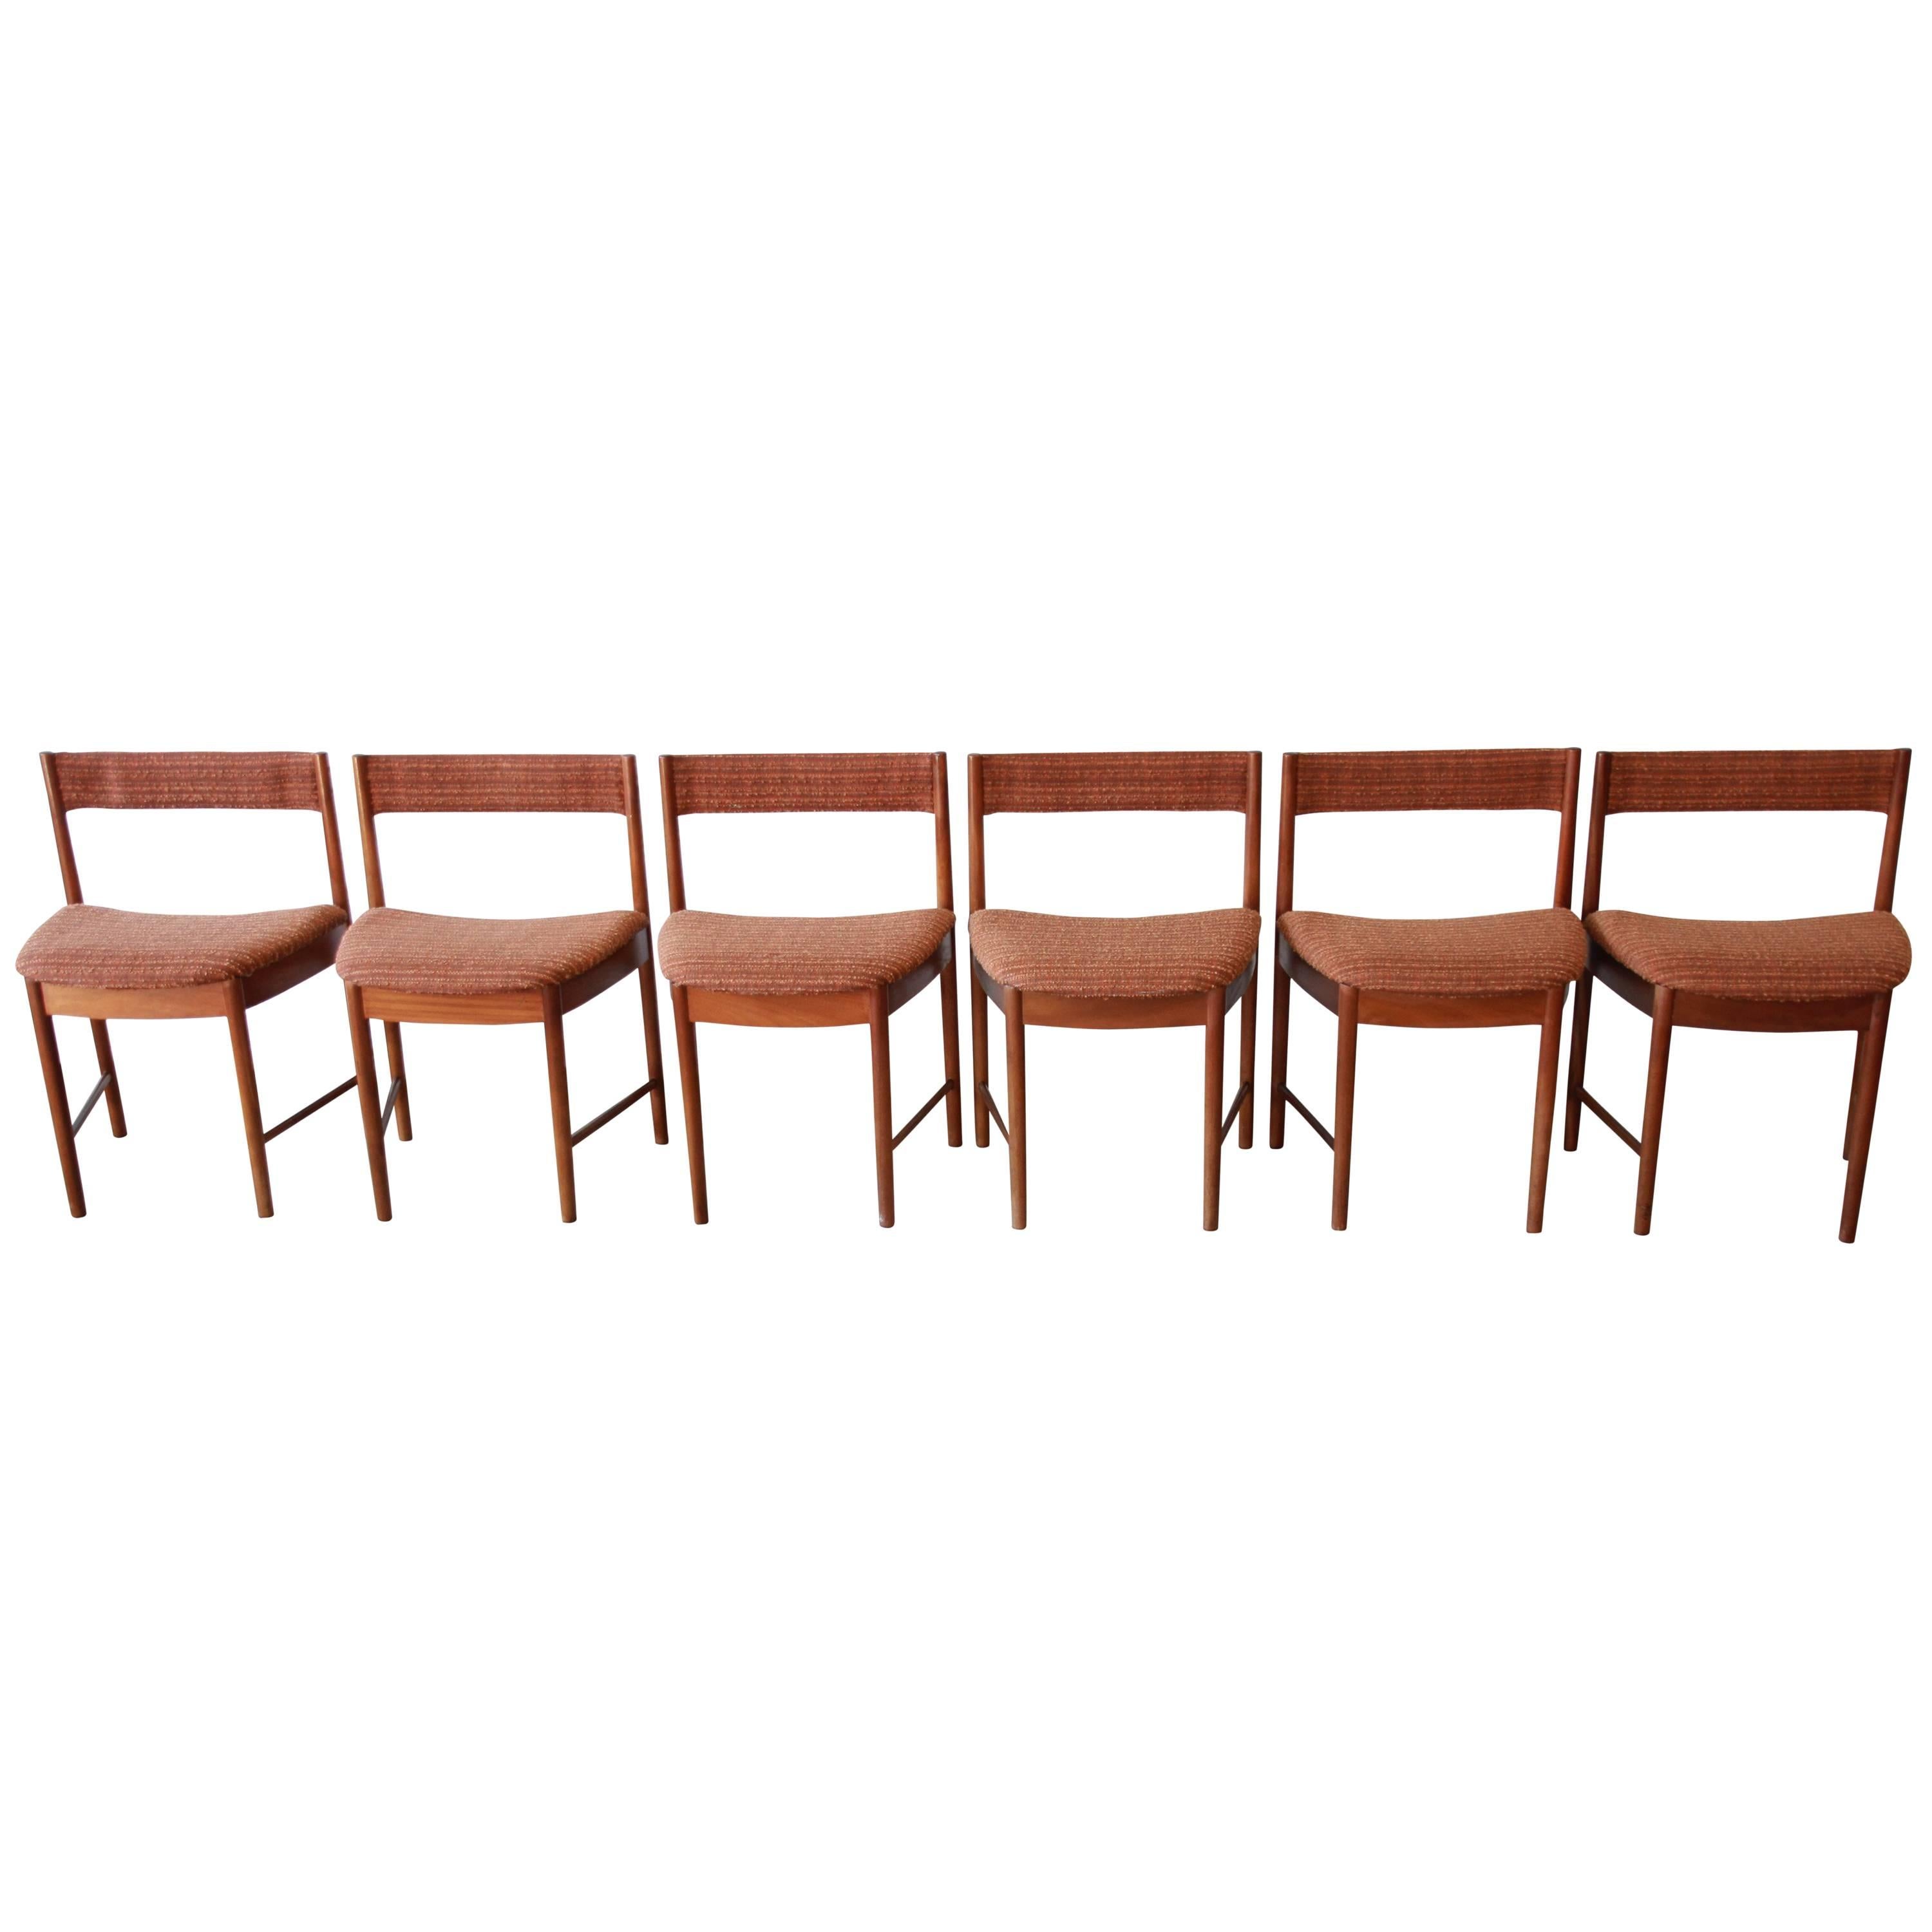 Mid-Century Modern Teak Wedge-Shaped Dining Chairs by G-Plan, Set of Six